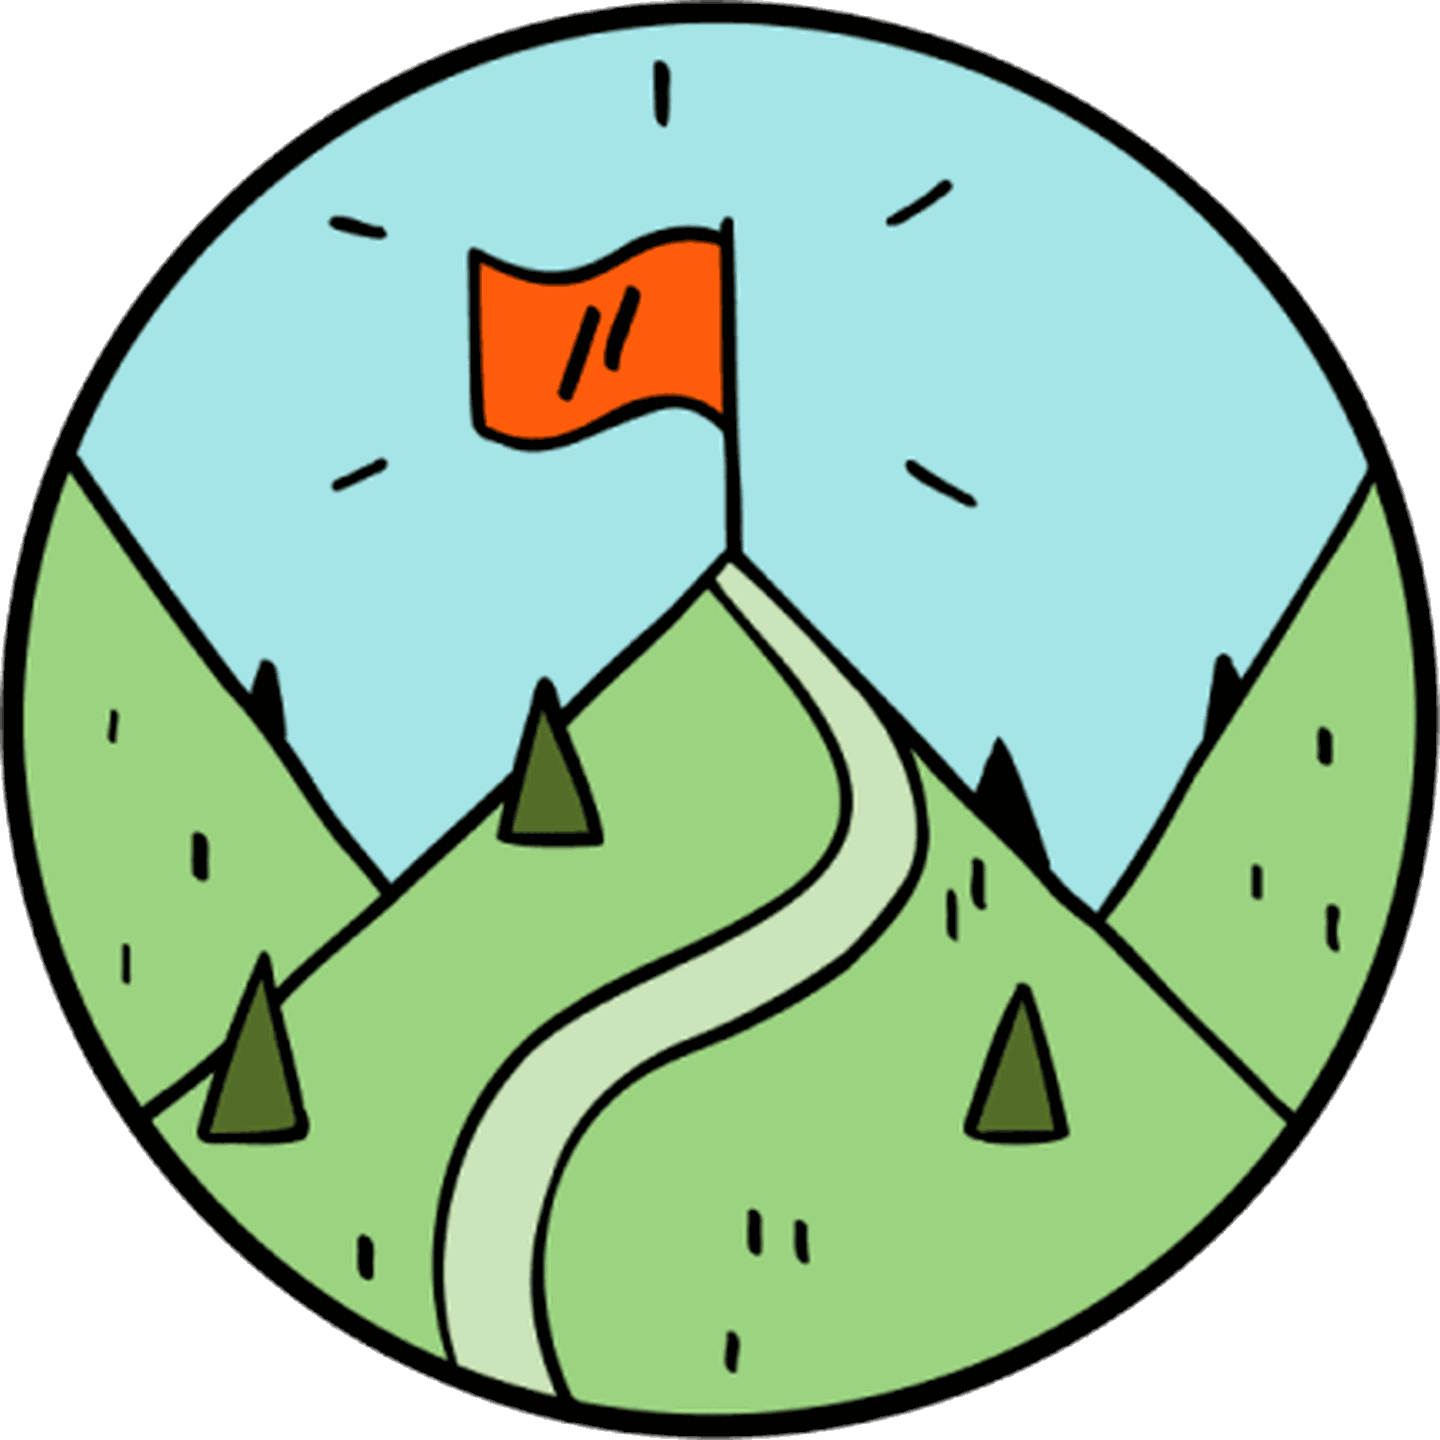 Illustration of a flag on top of a hill